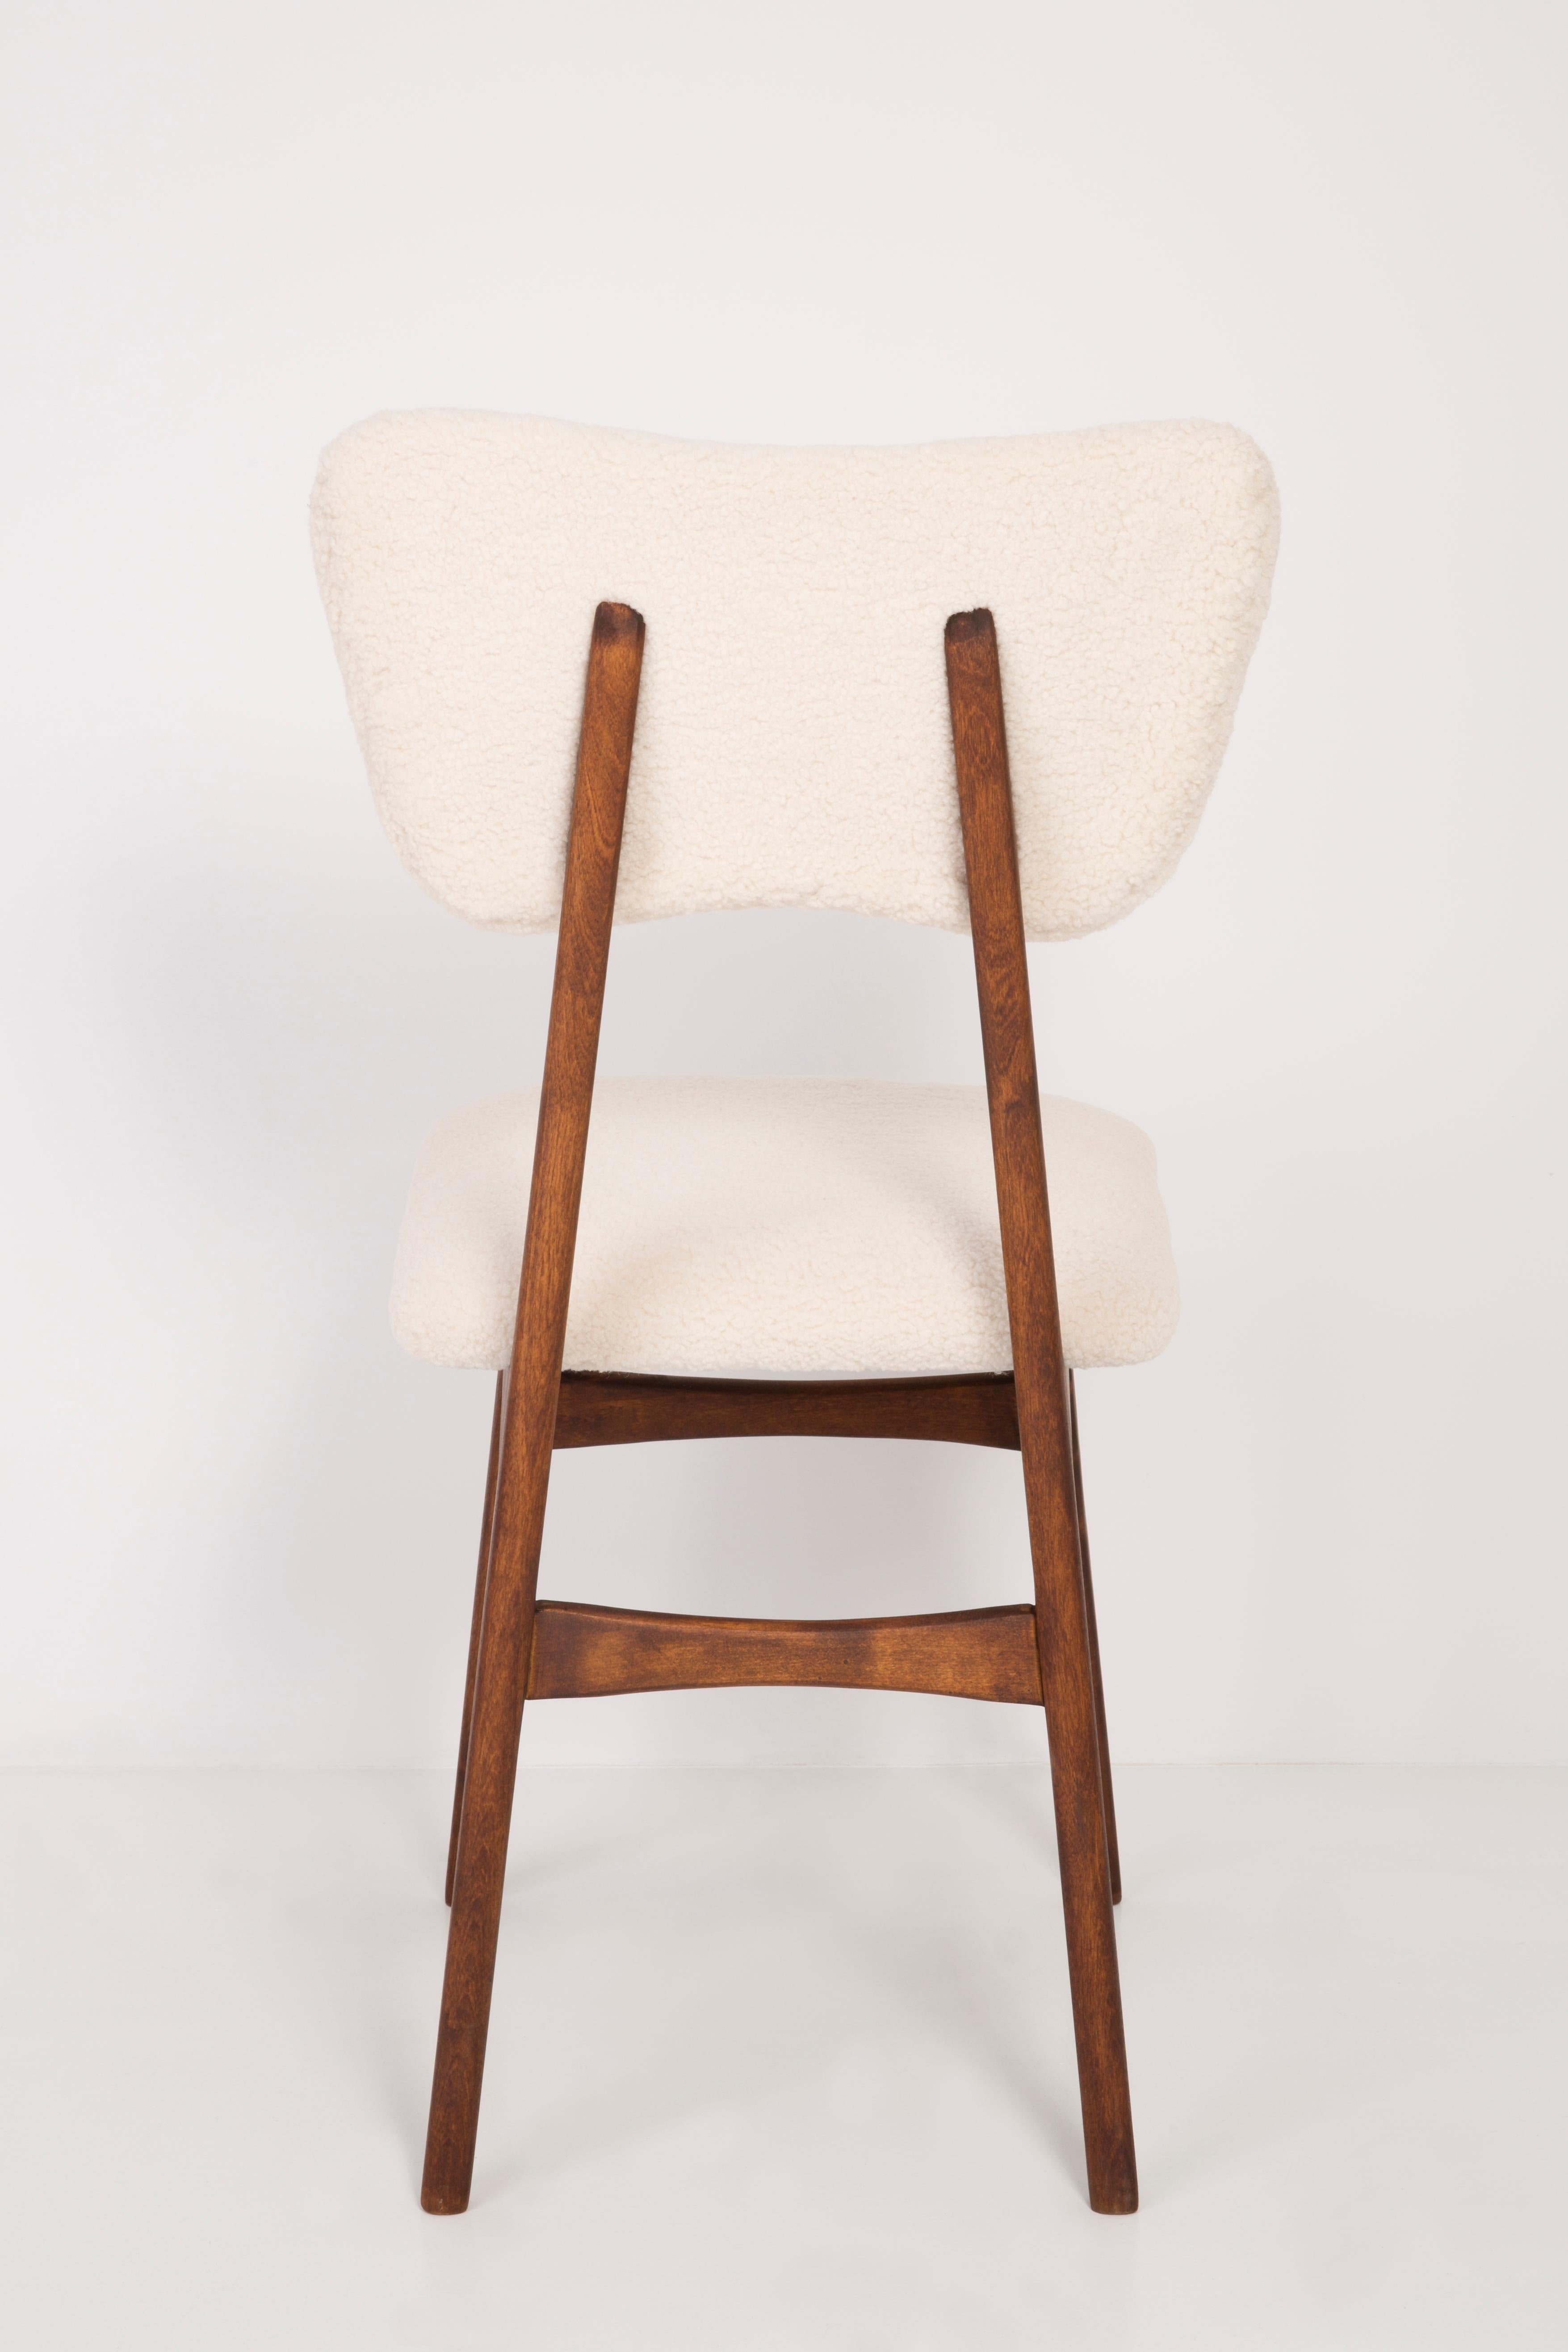 Set of Four 20th Century Light Crème Boucle Chairs, 1960s For Sale 6